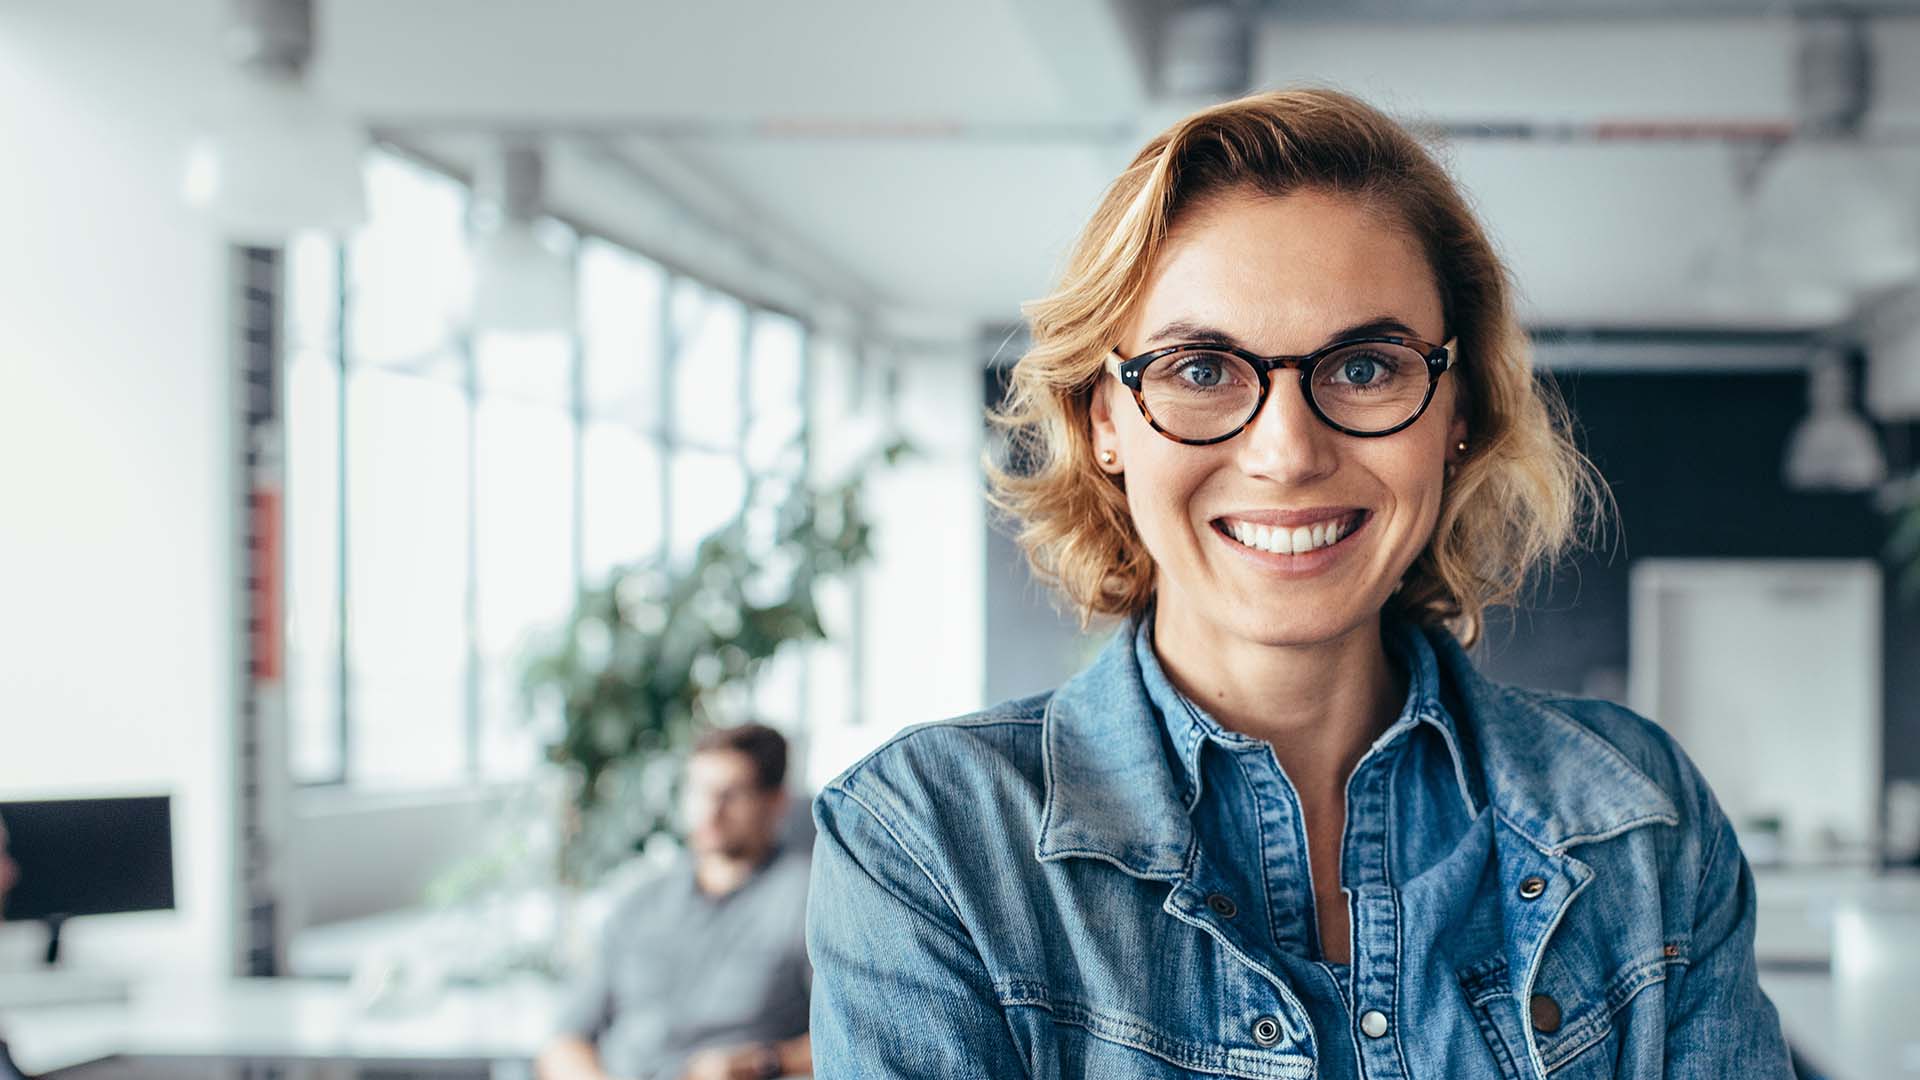 A smiling woman with glasses in an office.